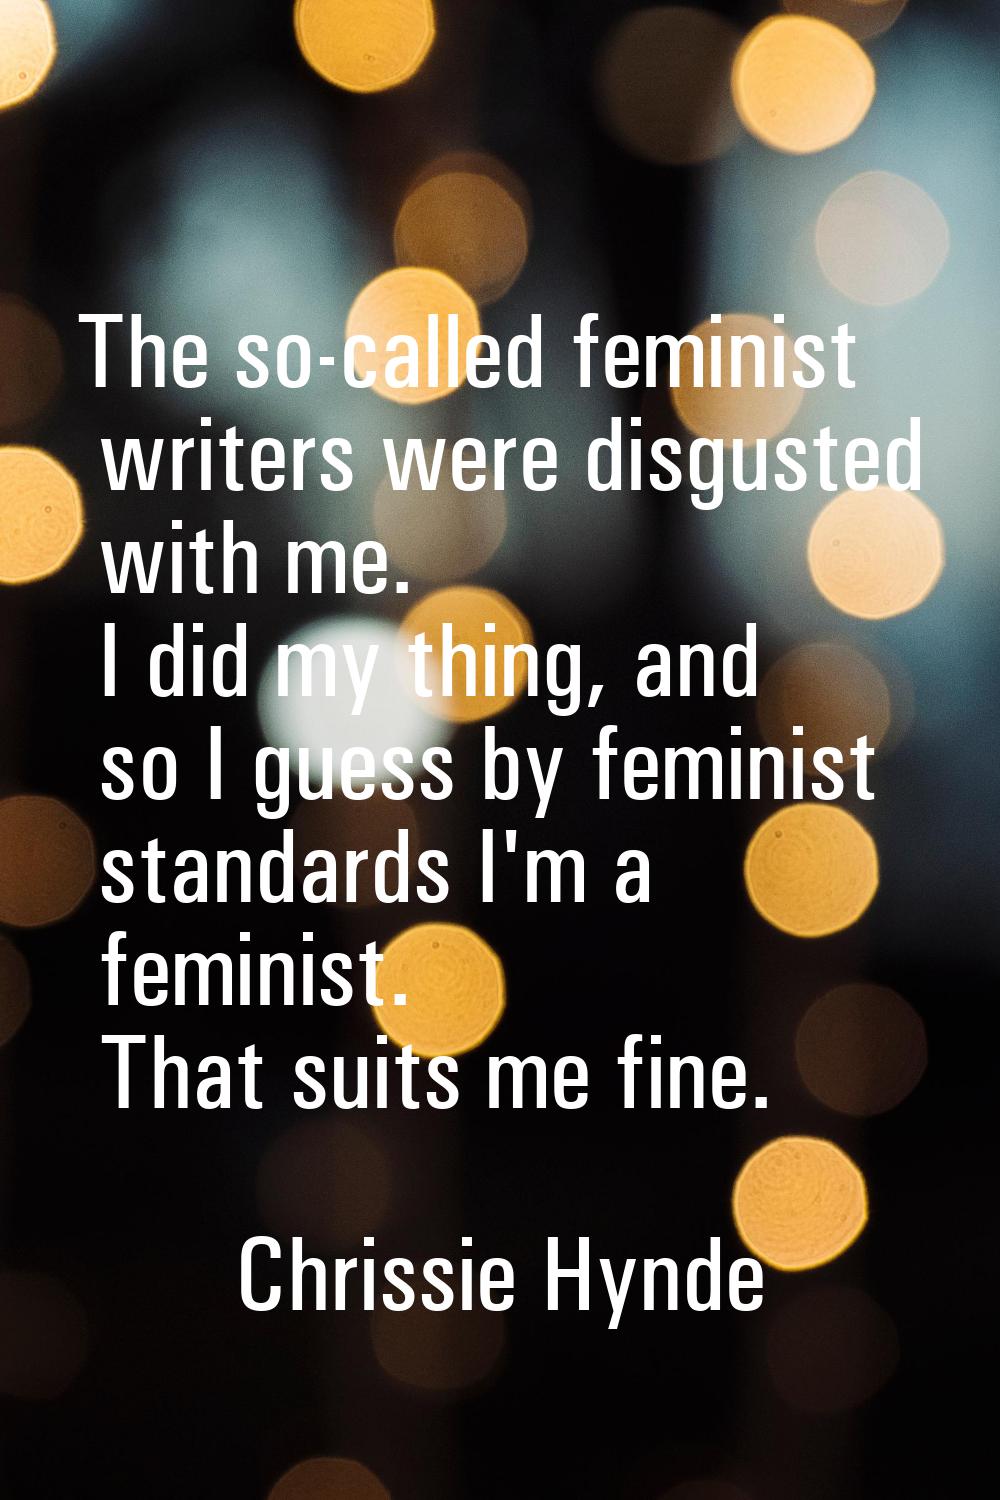 The so-called feminist writers were disgusted with me. I did my thing, and so I guess by feminist s